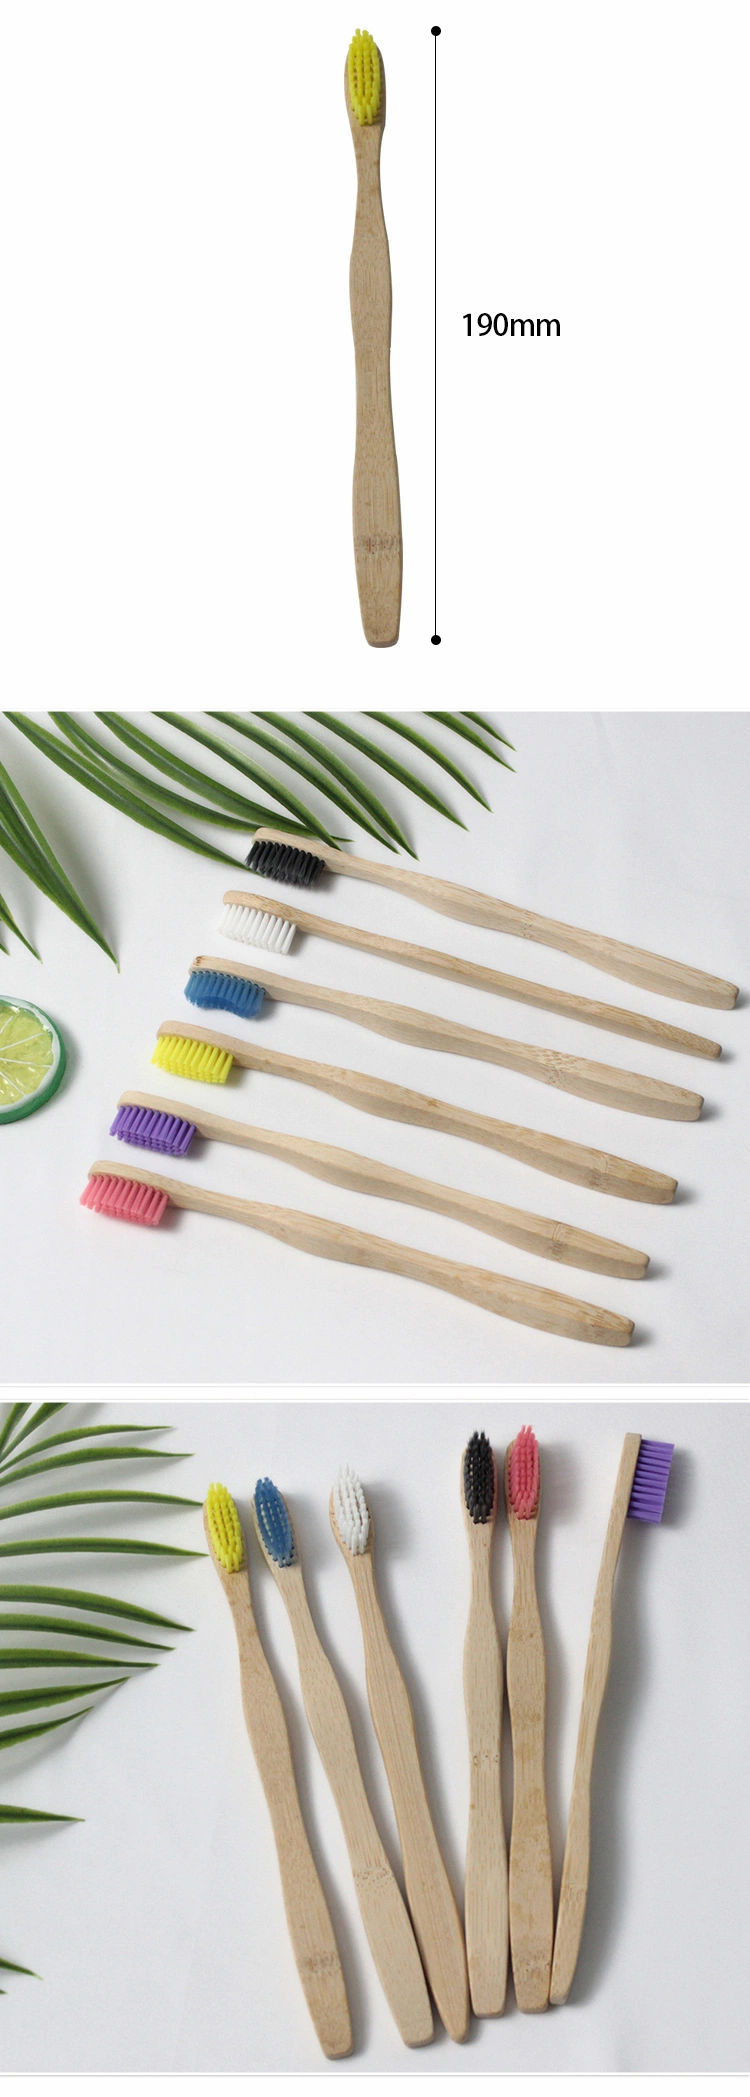 Compost Disposable 190mm Bamboo Toothbrush with Custom Logo